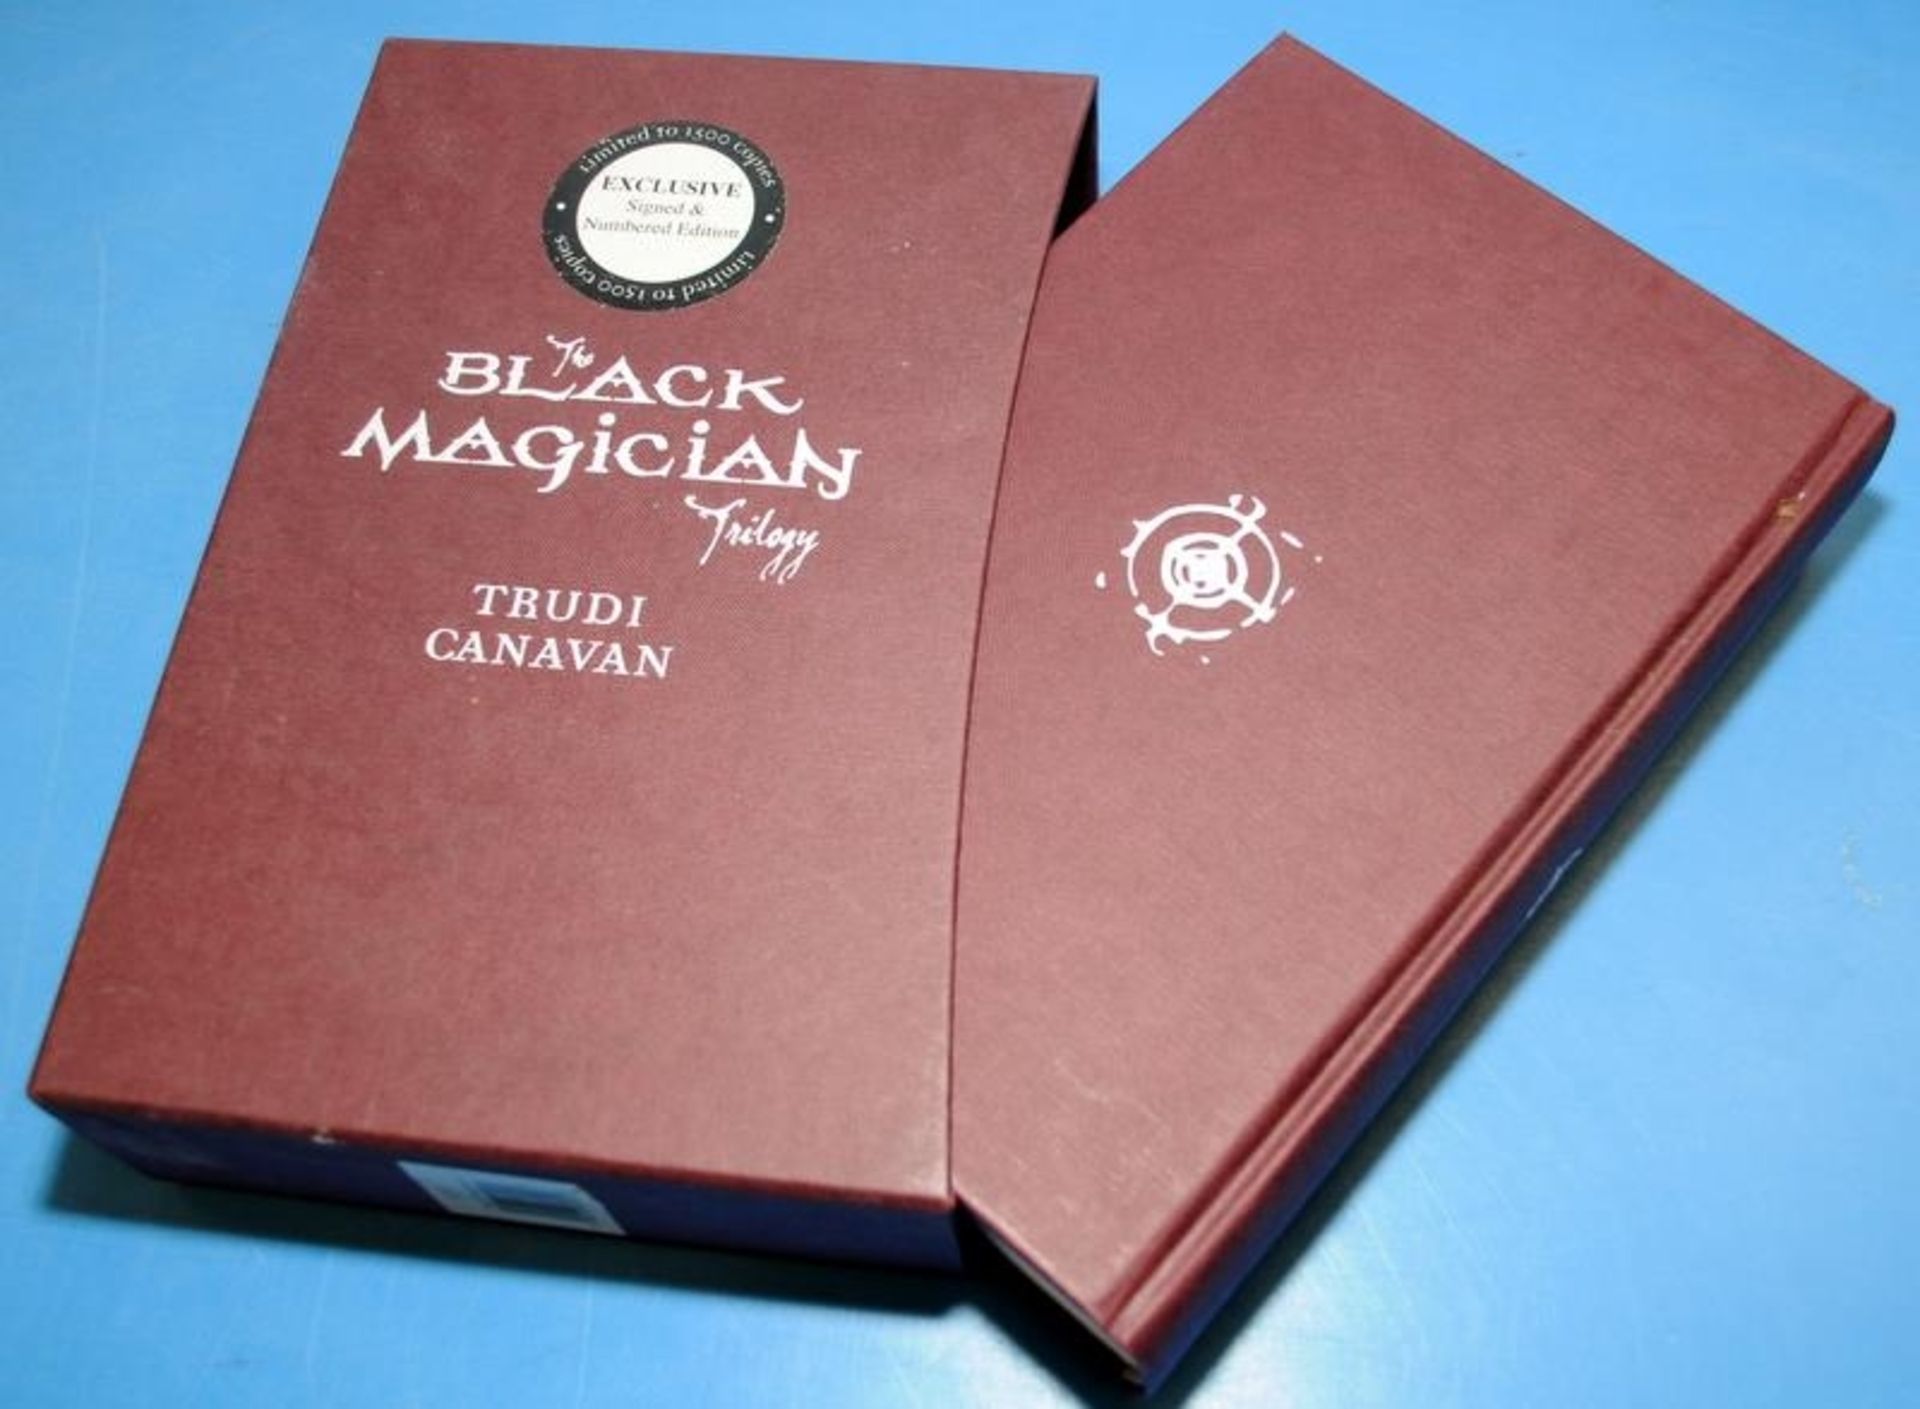 The Black Magician Trilogy by Trudi Canavan hardback book with slipcase. Signed and numbered edition - Image 2 of 4